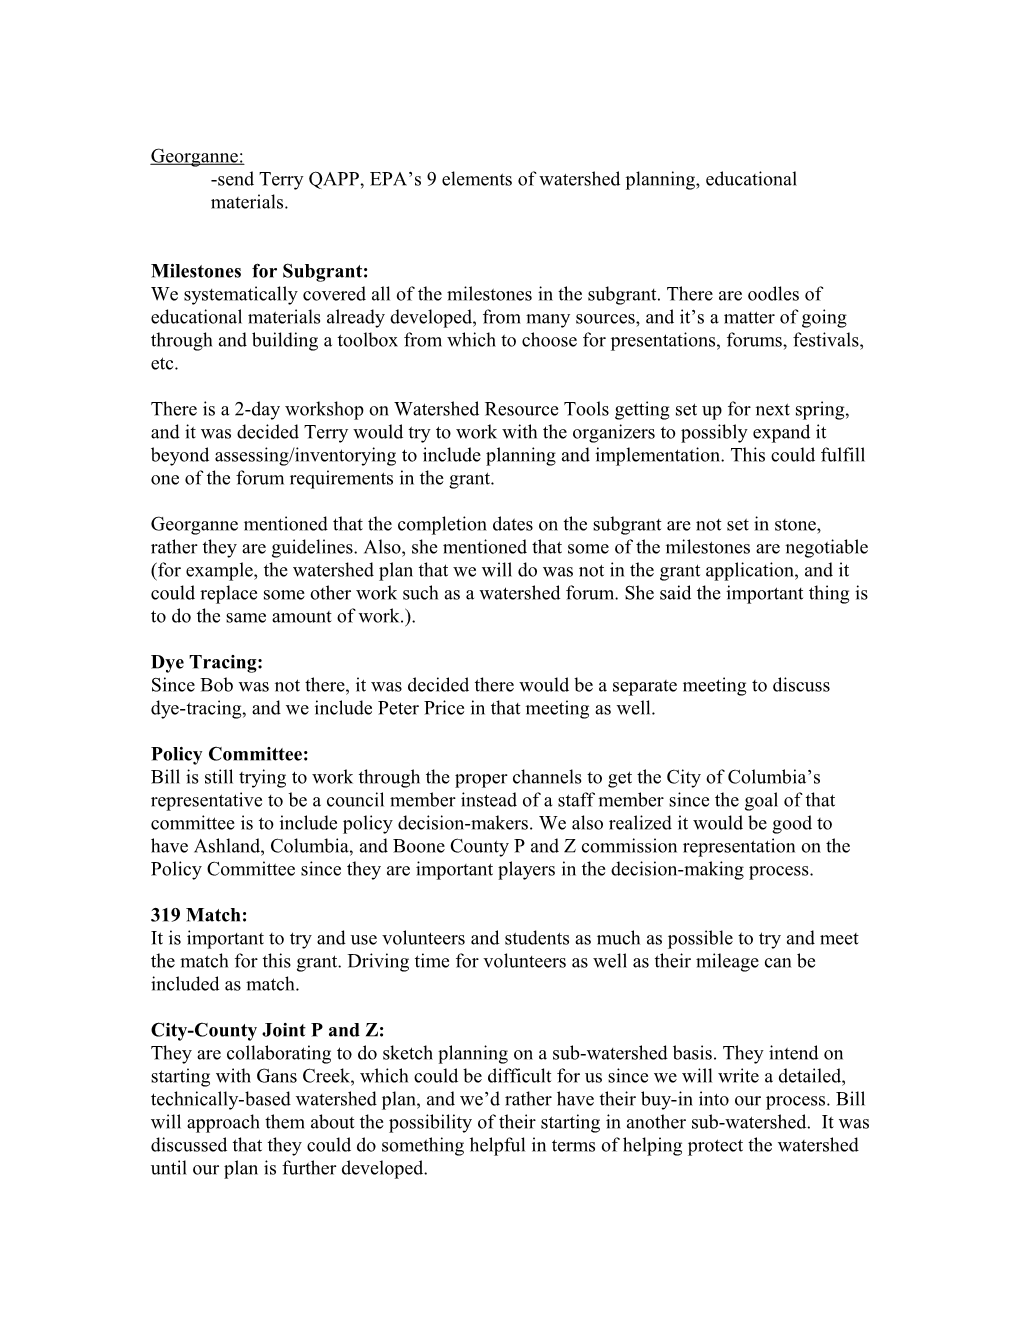 Minutes of the October 28, 2003 Meeting of the Bonne Femme 319 Steering Committee